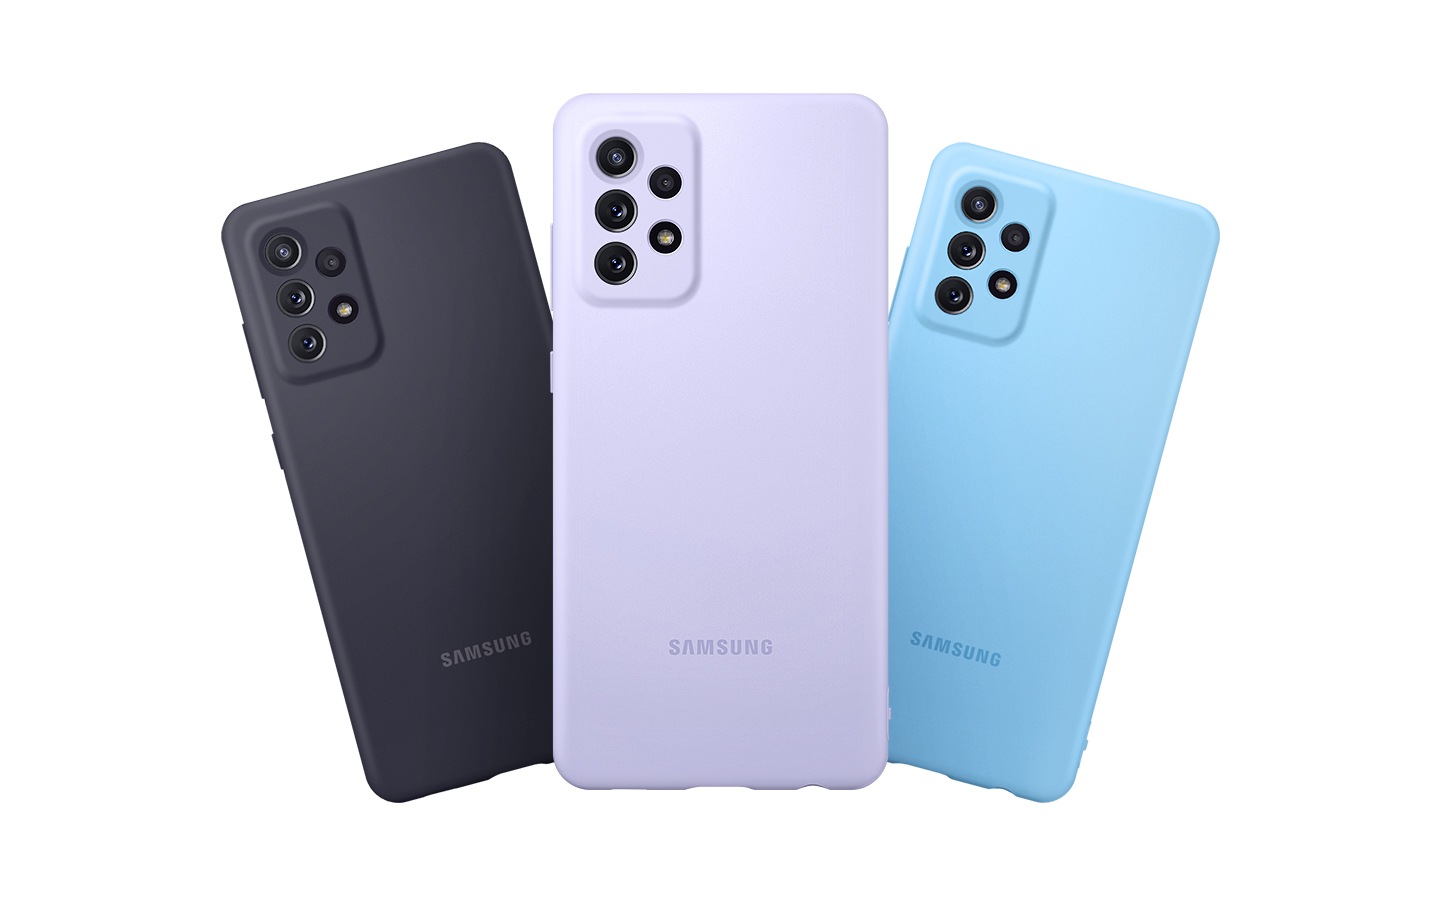 Three Galaxy A72 with Silicone Covers fanned out. Three seen from the rear to show the rear camera and Silicone Cover's colors Black, Violet, Blue.